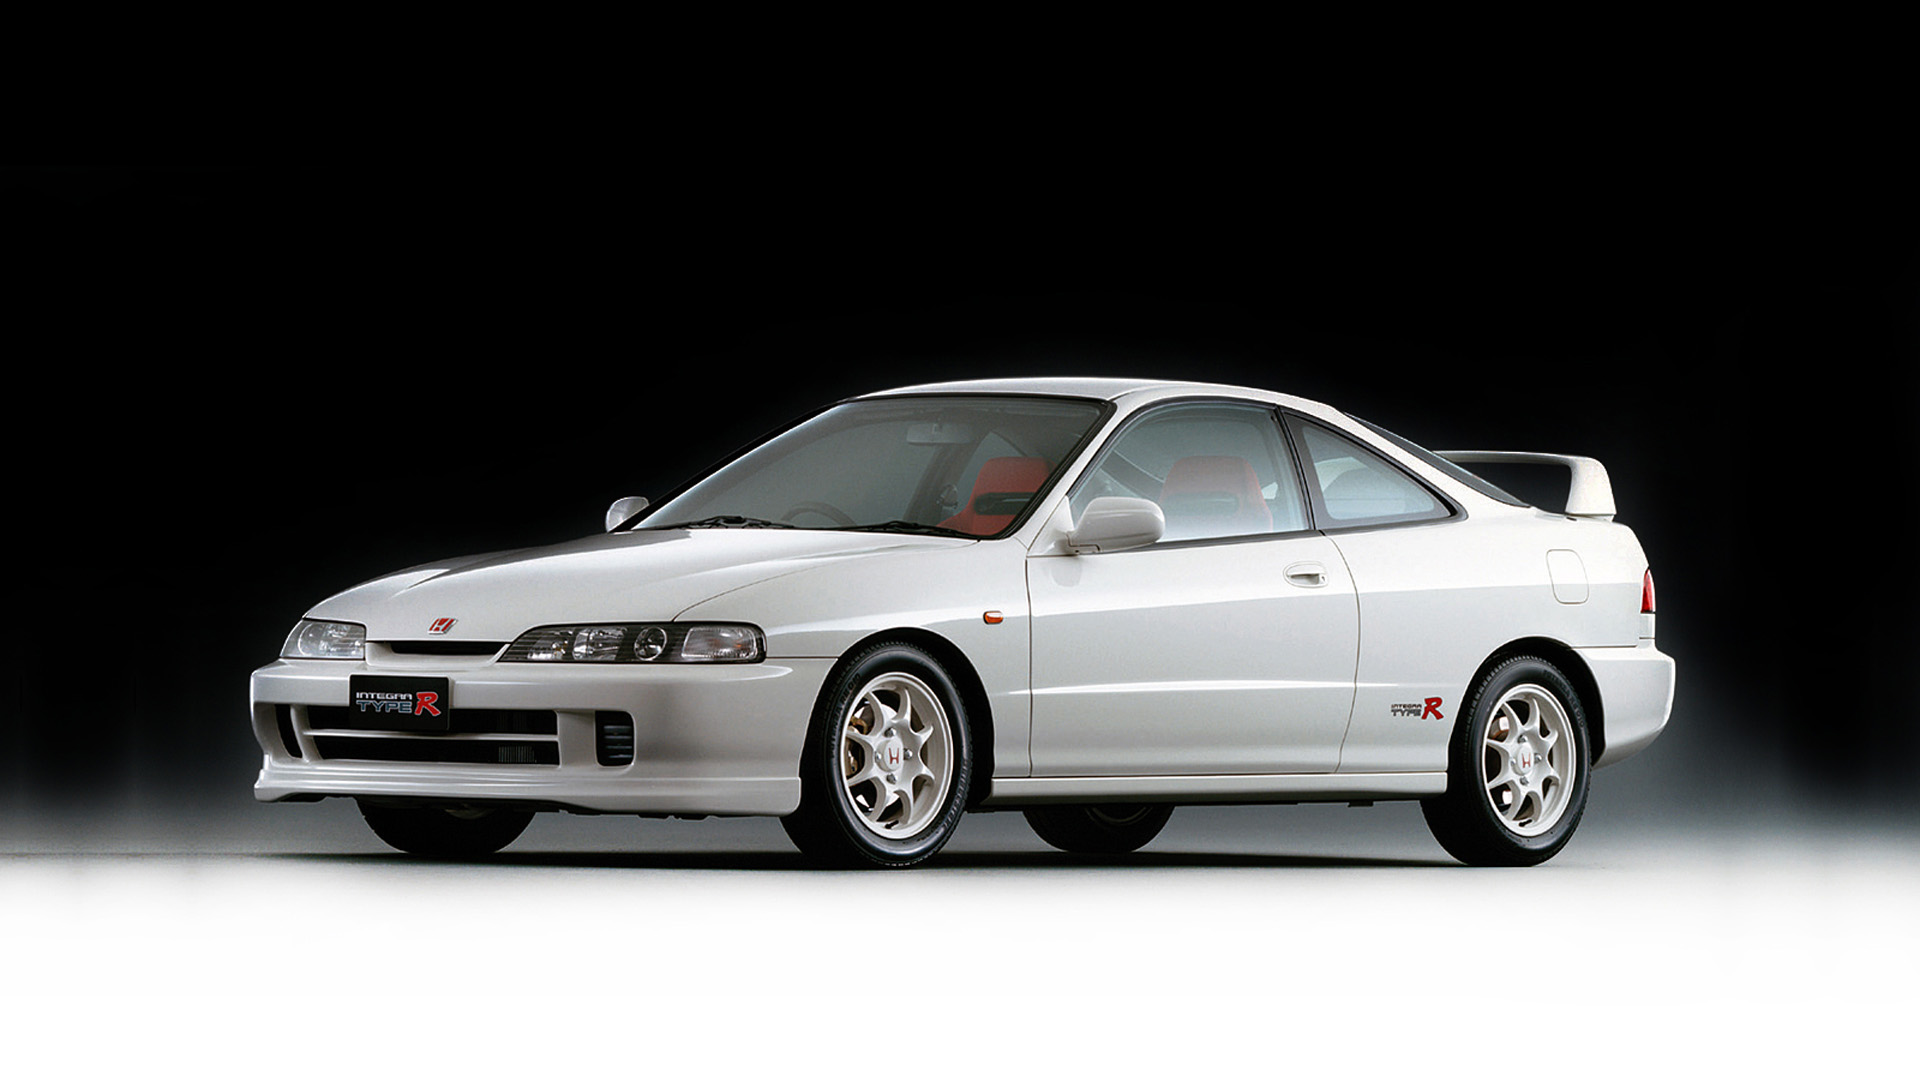 Free Download 1995 Honda Integra Type R Wallpapers Hd Images Wsupercars 1920x1080 For Your Desktop Mobile Tablet Explore 31 Hd Wallpapers Of Acura Integra Type R Hd Wallpapers Of